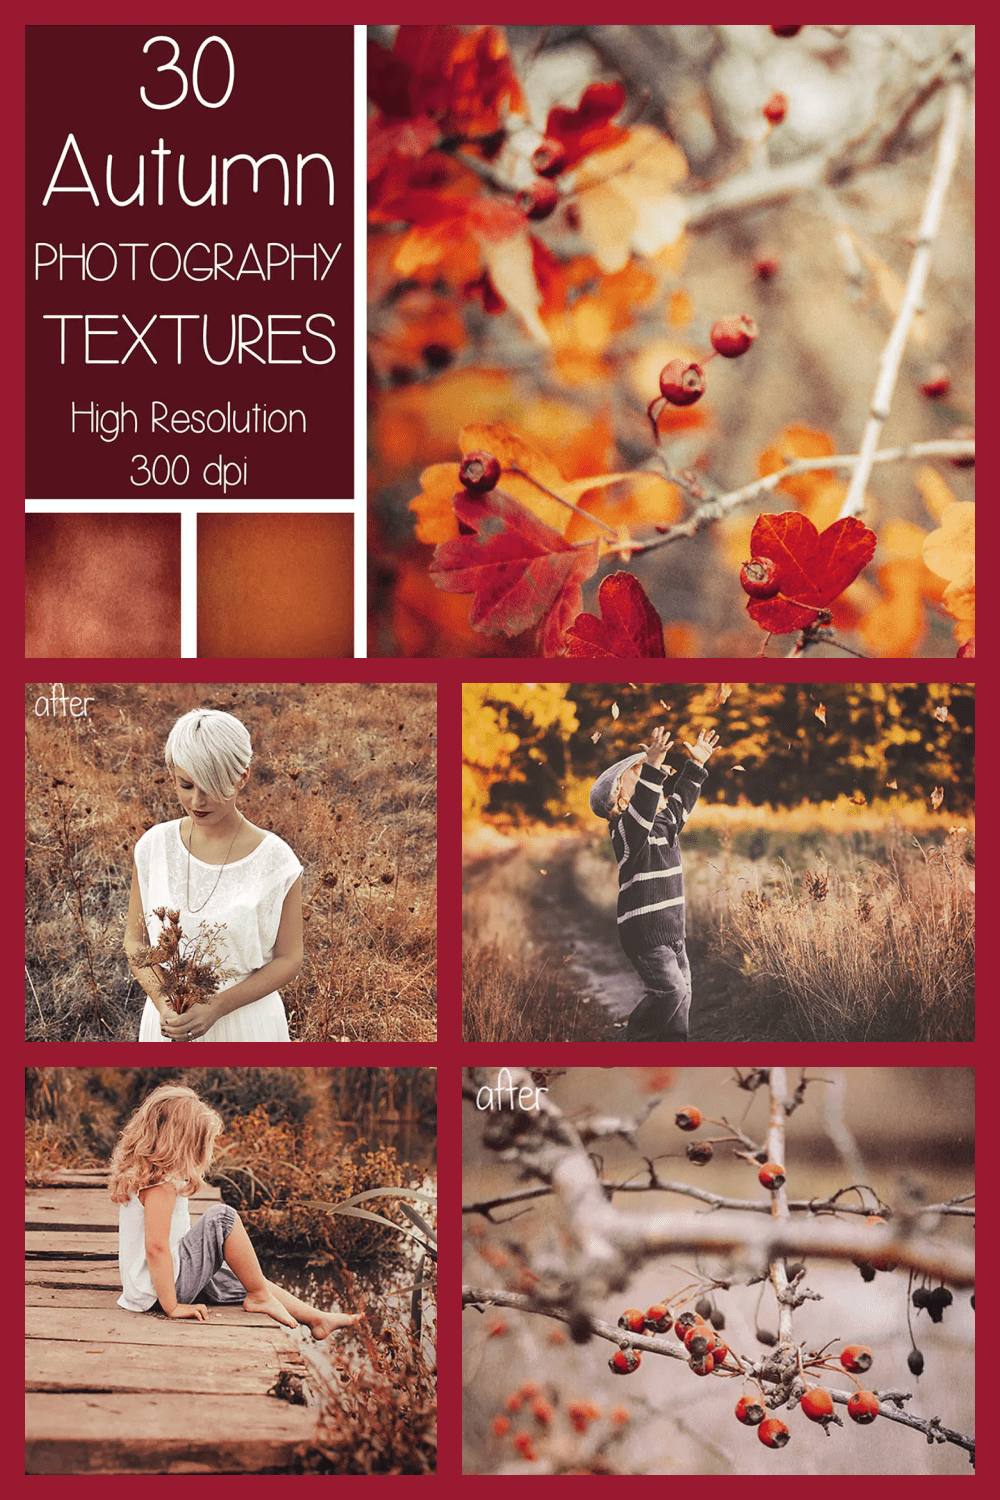 Collage of photos of people in autumn nature.